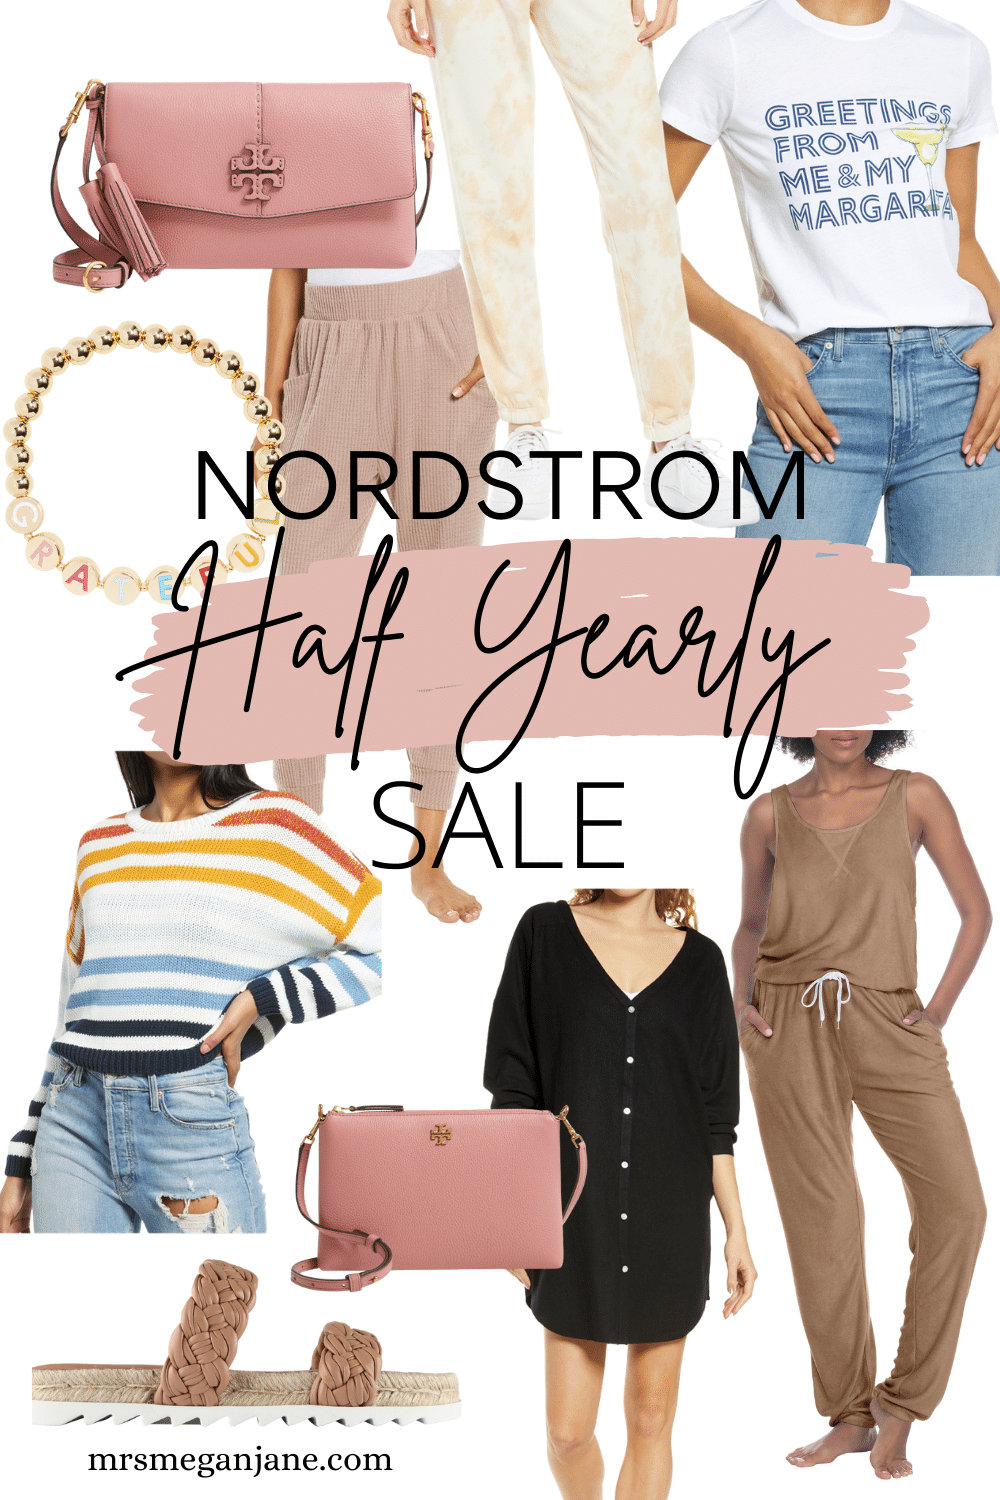 Nordstrom Half Yearly Sale My Top Picks for 2021